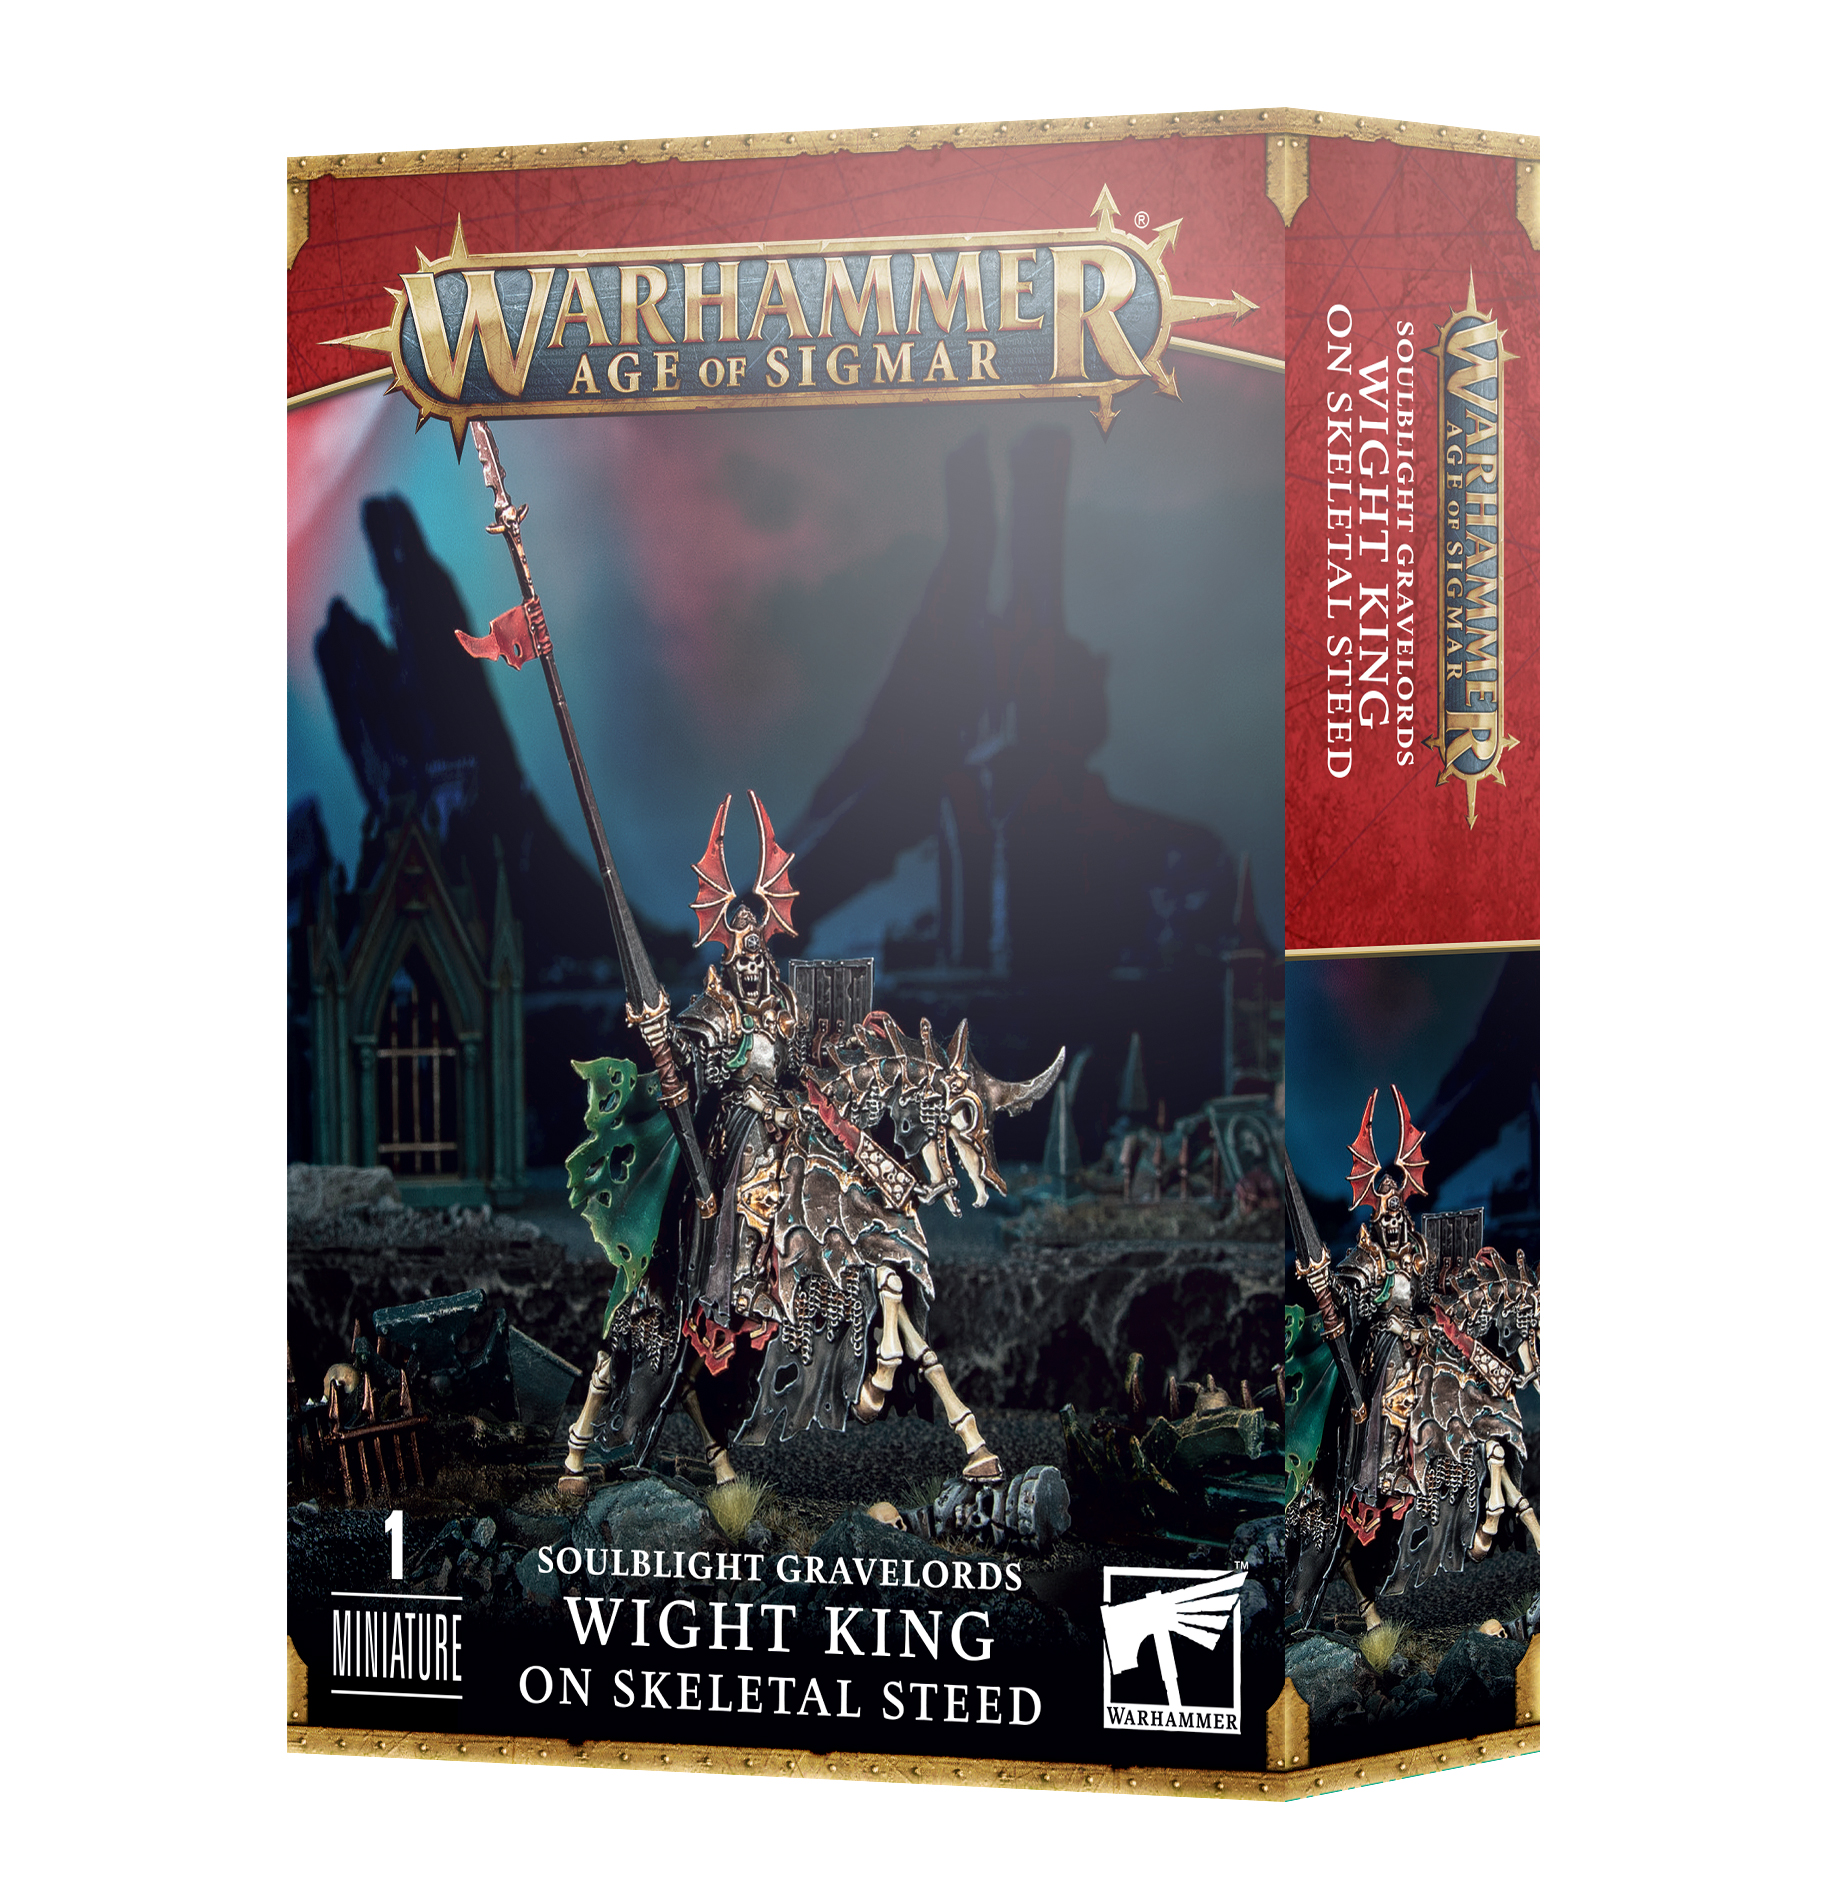 Warhammer Age of Sigmar: Soulblight Gravelords: Wight King on Skeletal Steed  